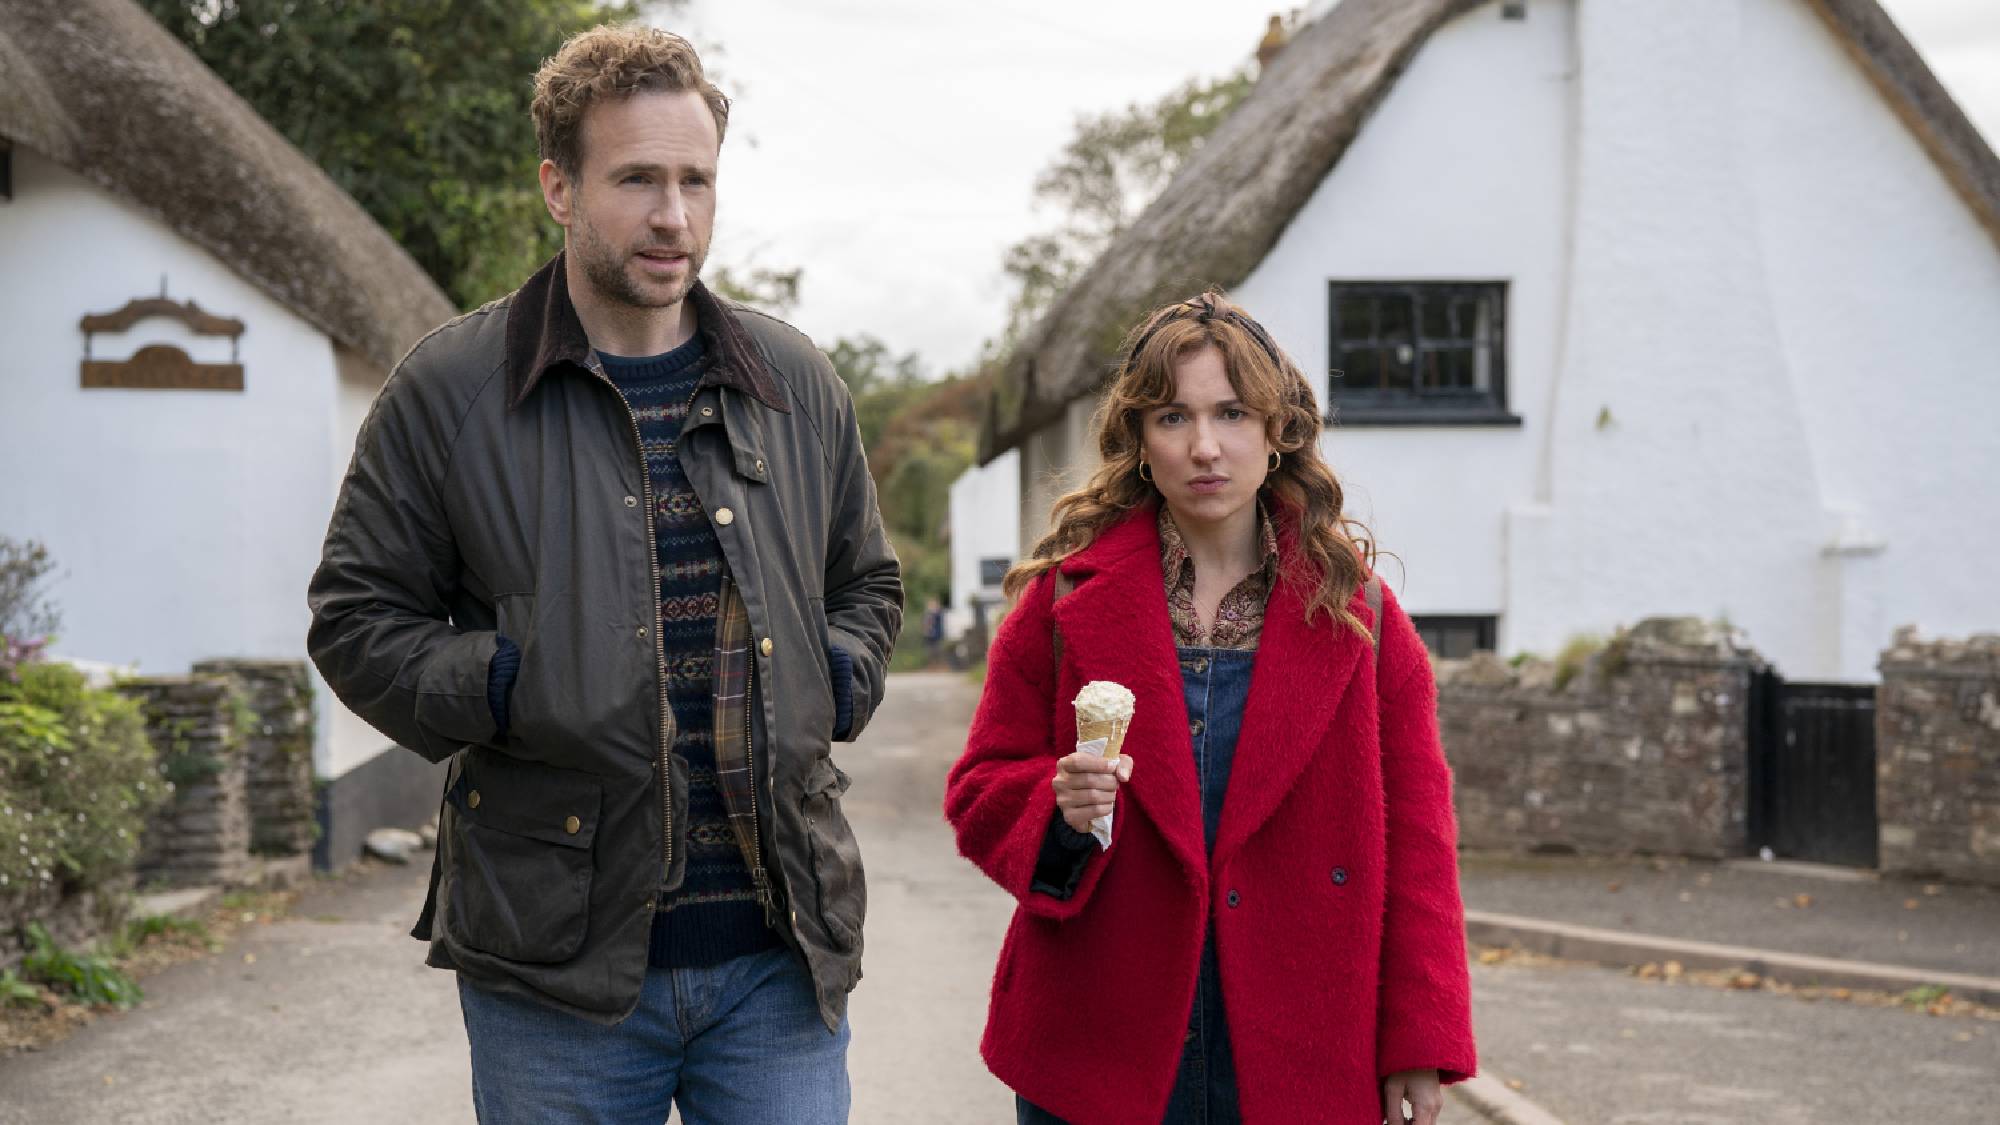 Rafe Spall as Jason Ross and Esther Smith as Nikki Newman in Trying on Apple TV Plus